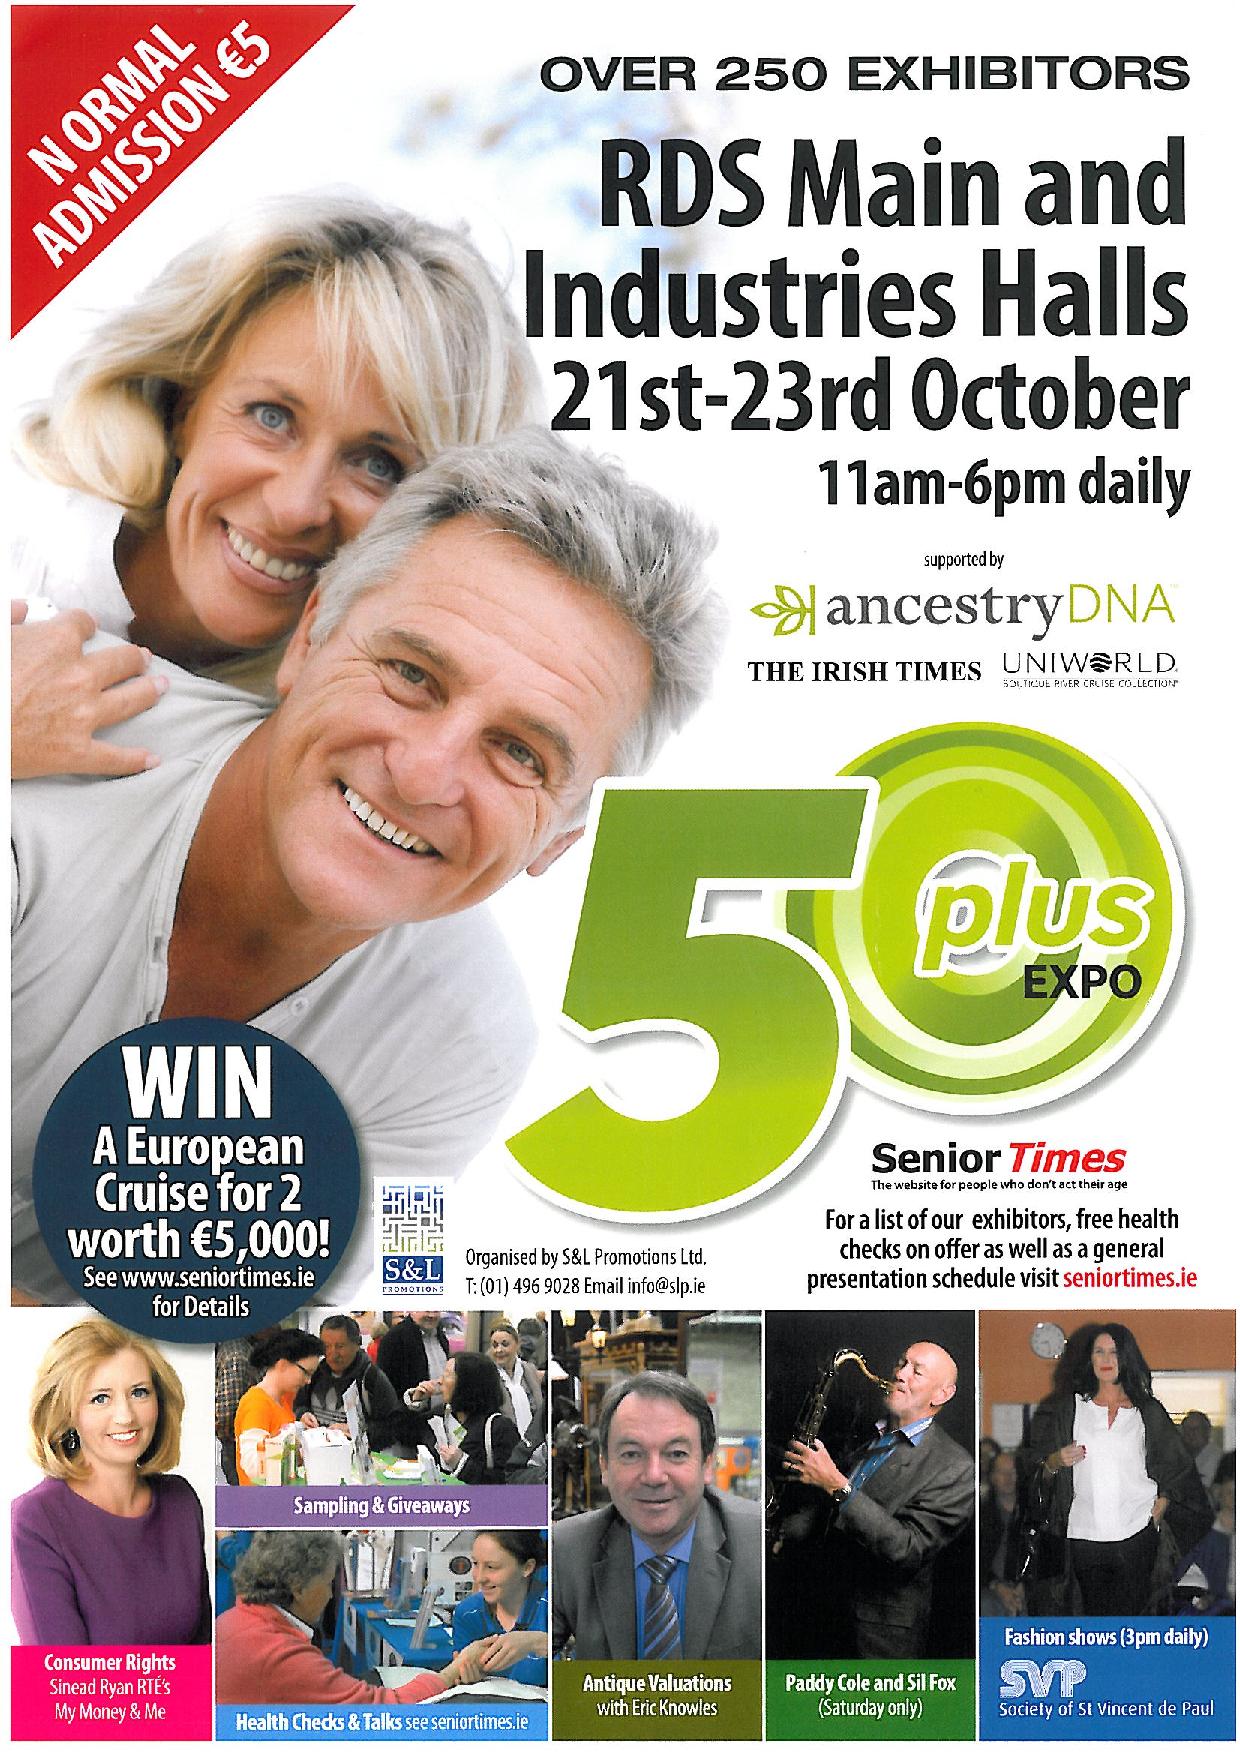 PPUI at the 50 Plus Expo